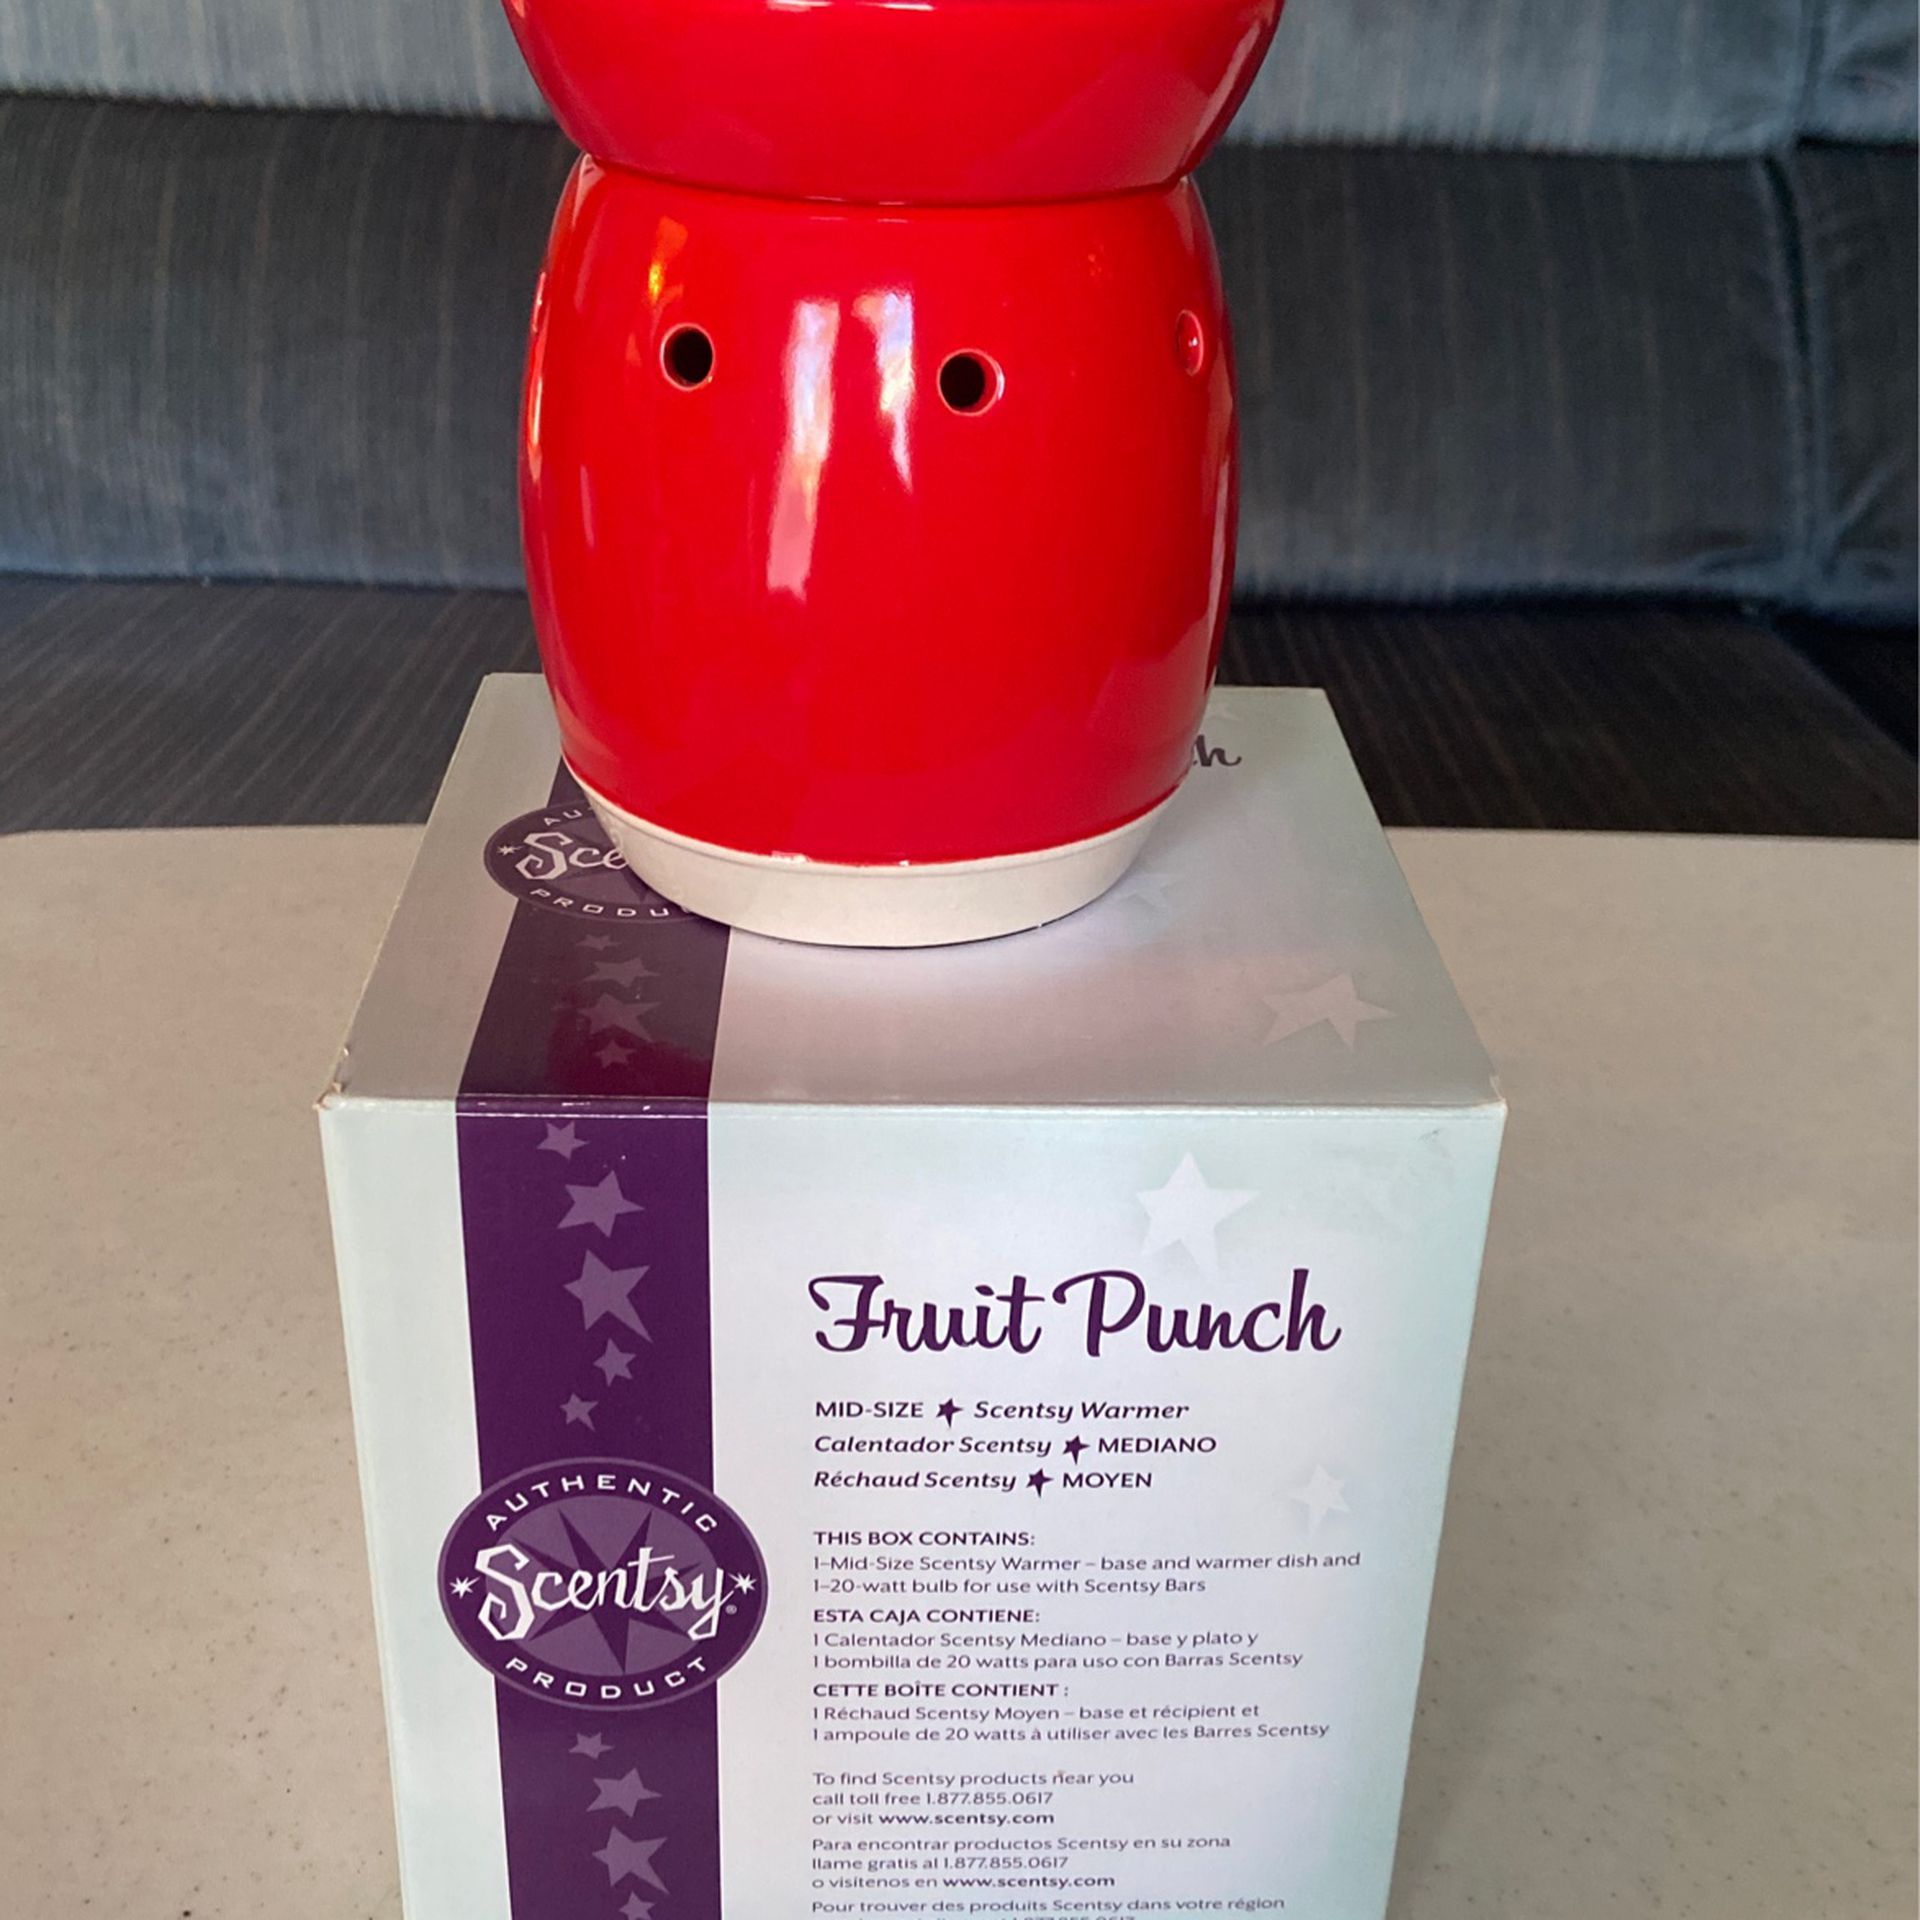 New “Fruit Punch” Scentsy Warmer